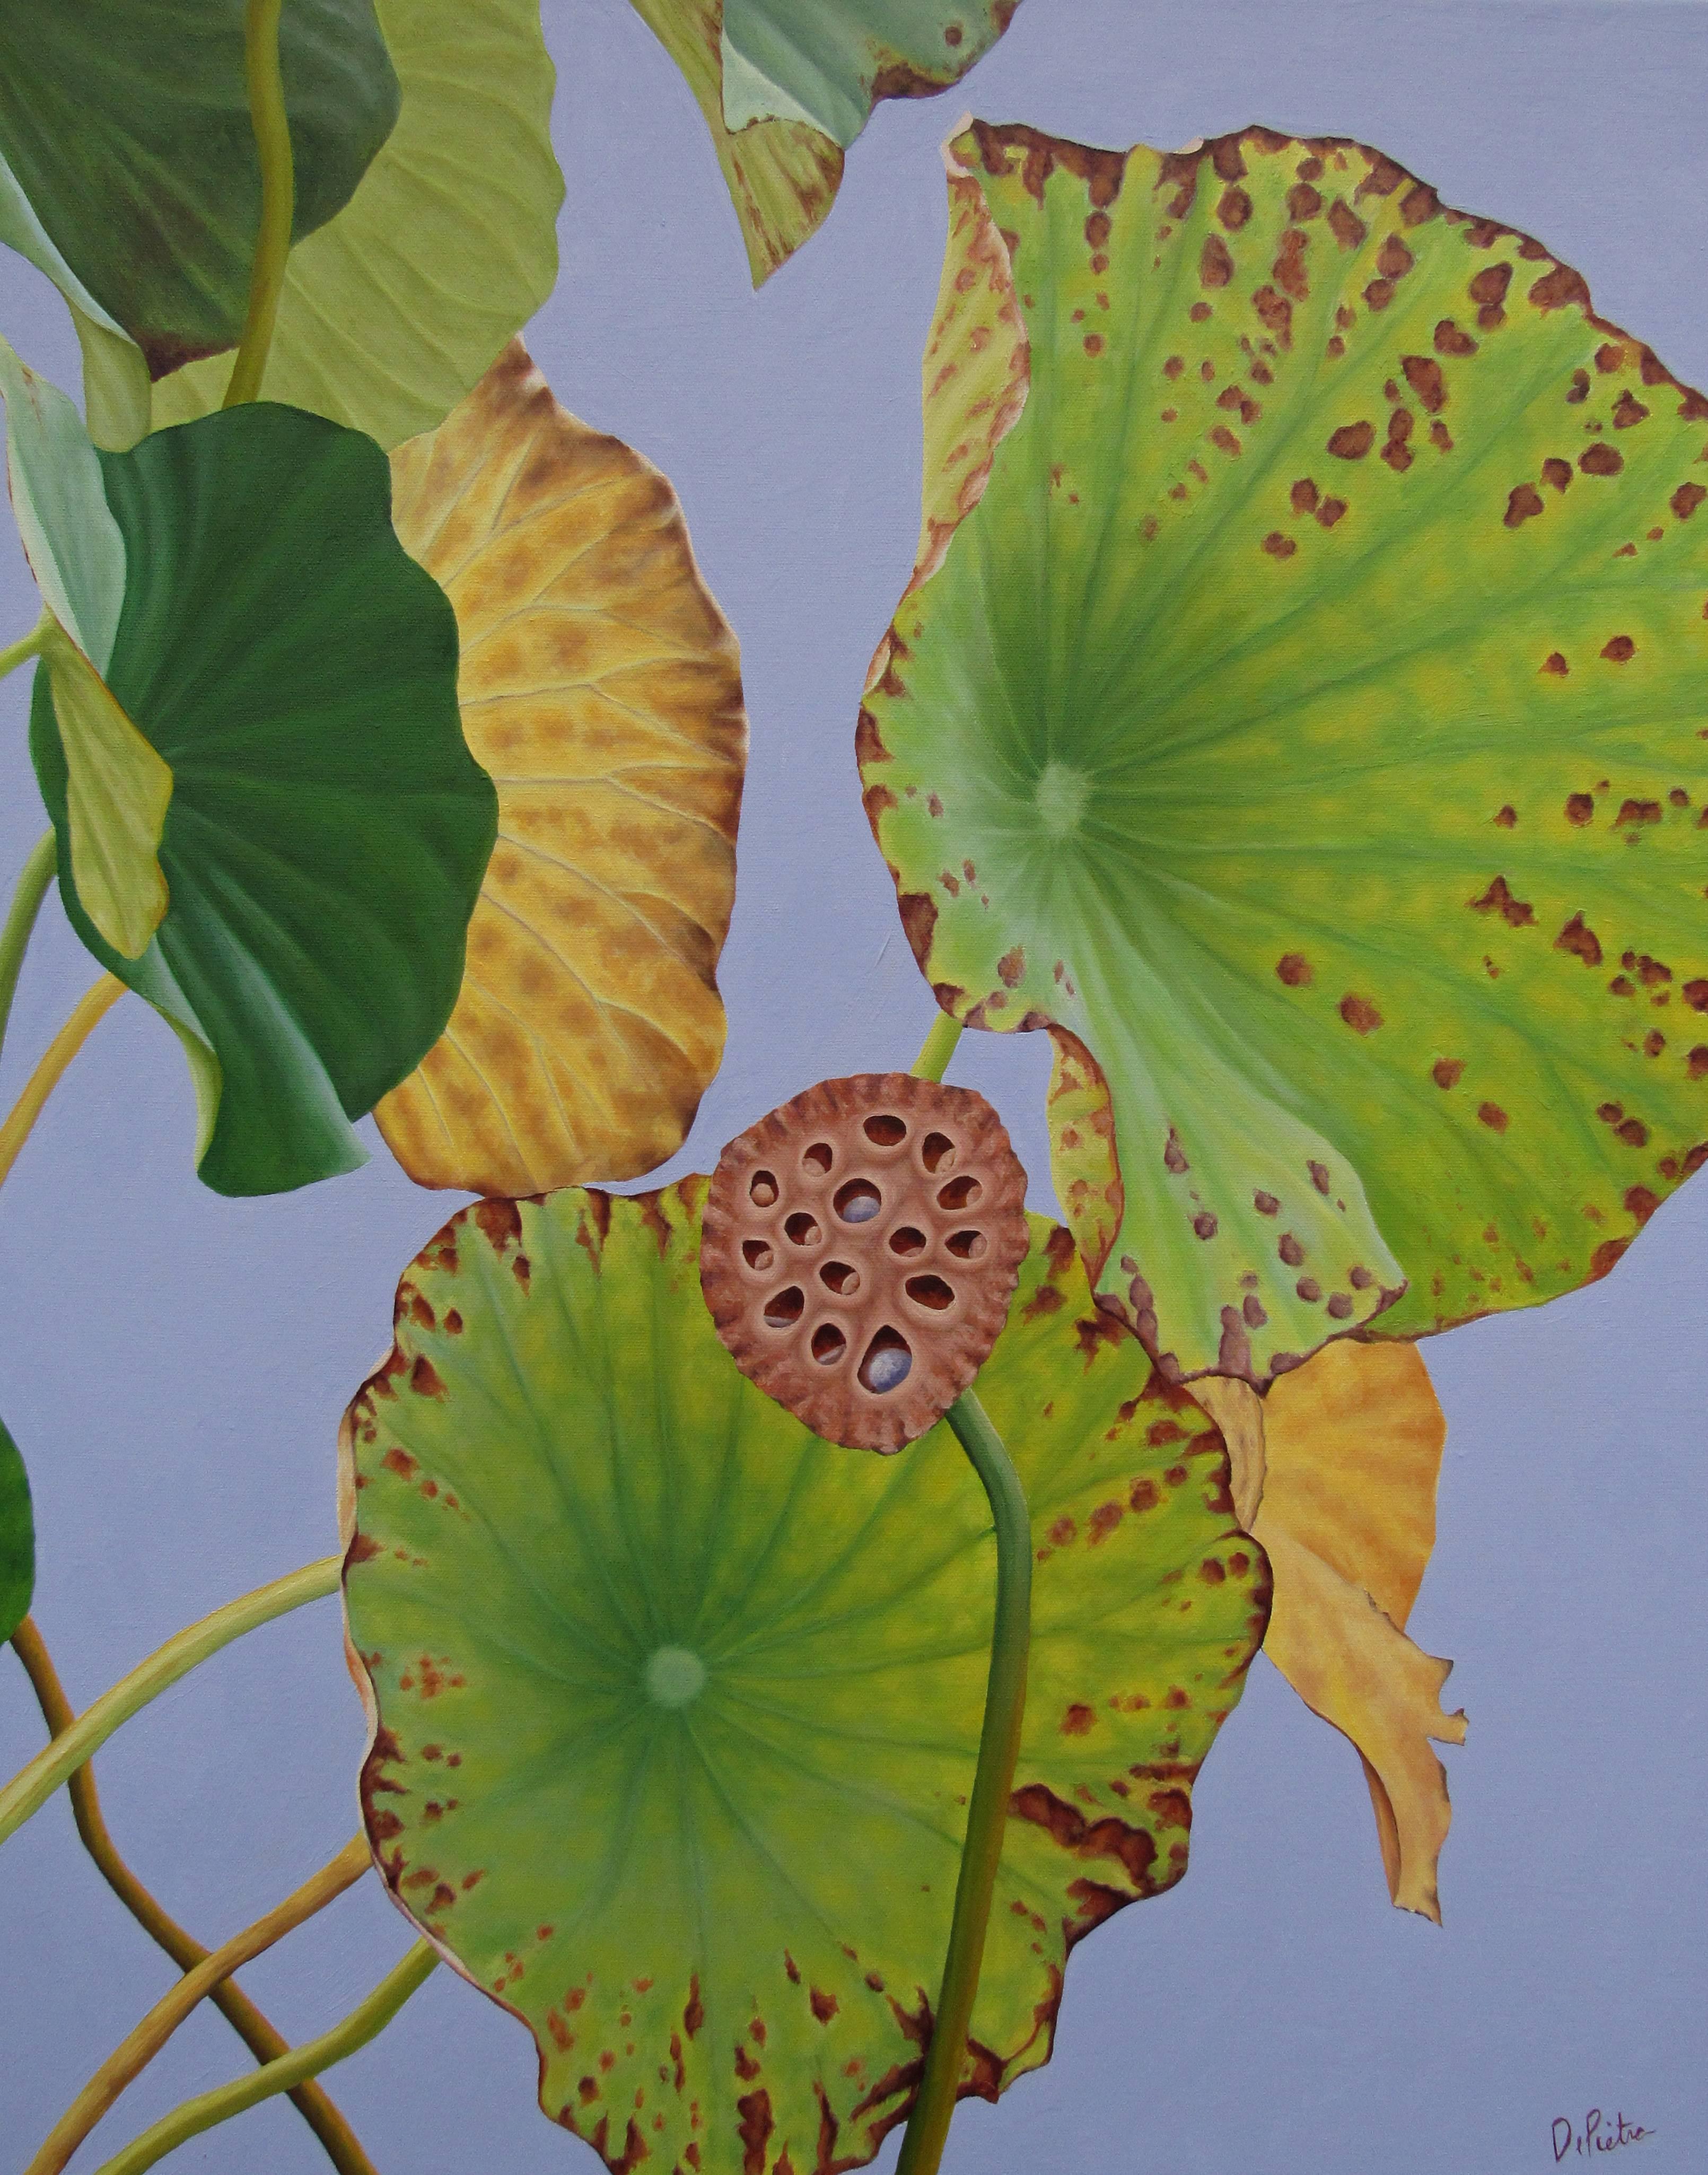 Frank DePietro Landscape Painting - Lotus Number Four (Hard Edge Floral Still Life Painting of Lotus Leaves)